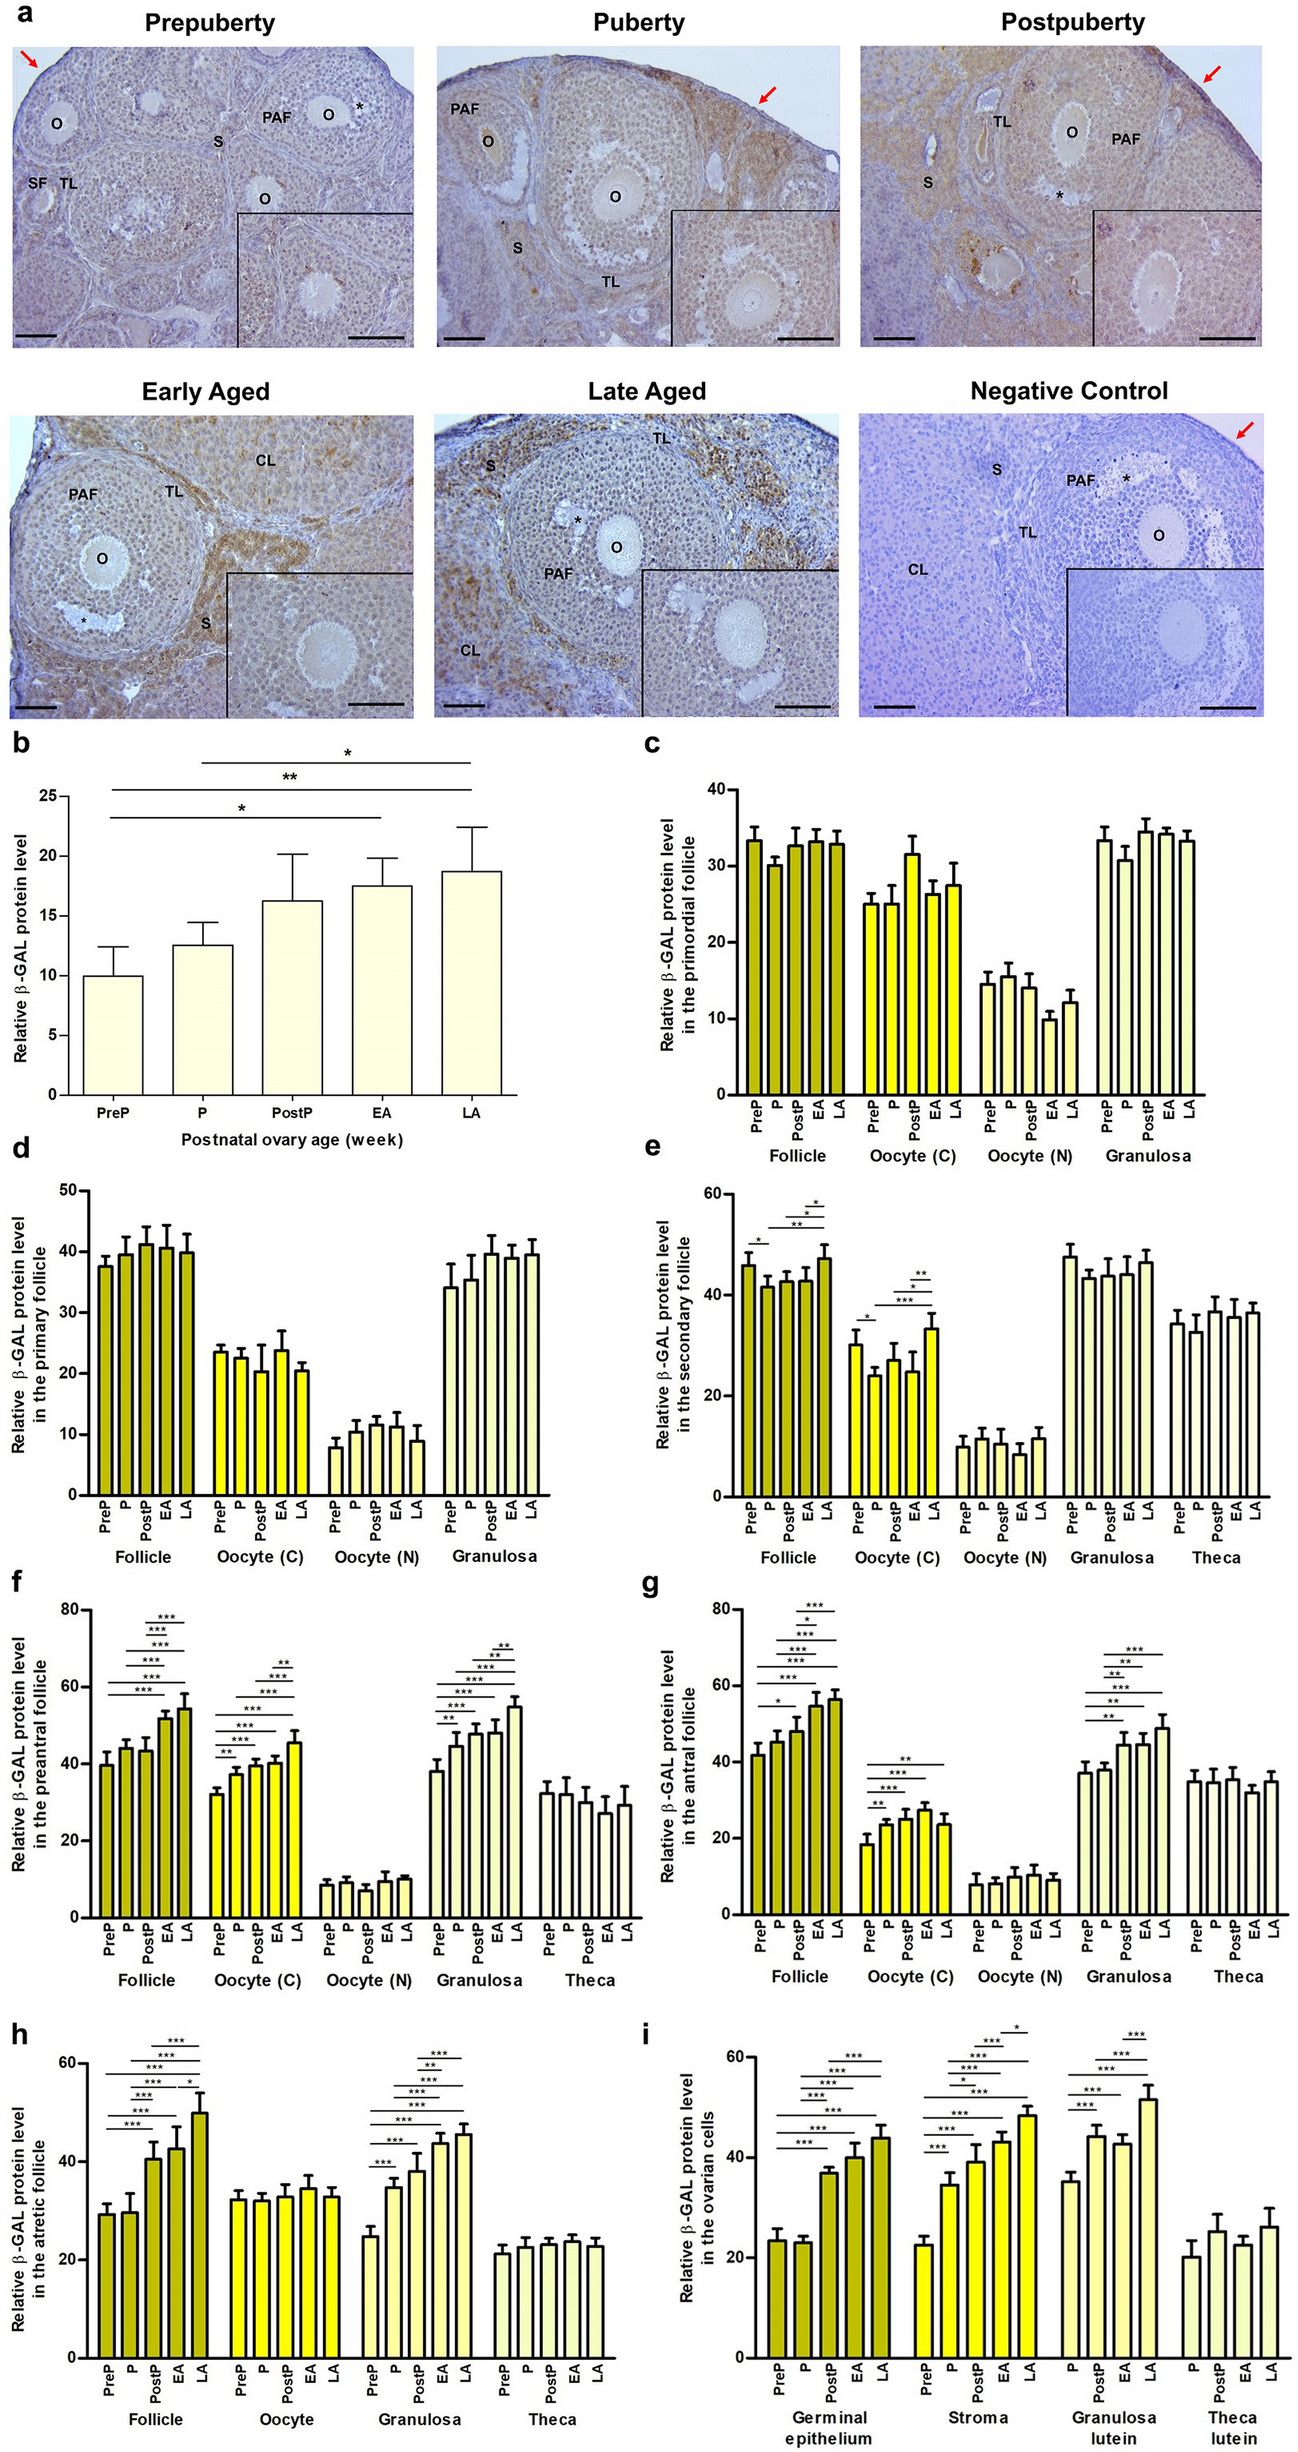 The DNA double-strand break repair proteins γH2AX, RAD51, BRCA1, RPA70, KU80, and XRCC4 exhibit follicle-specific expression differences in the postnatal mouse ovaries from early to older ages